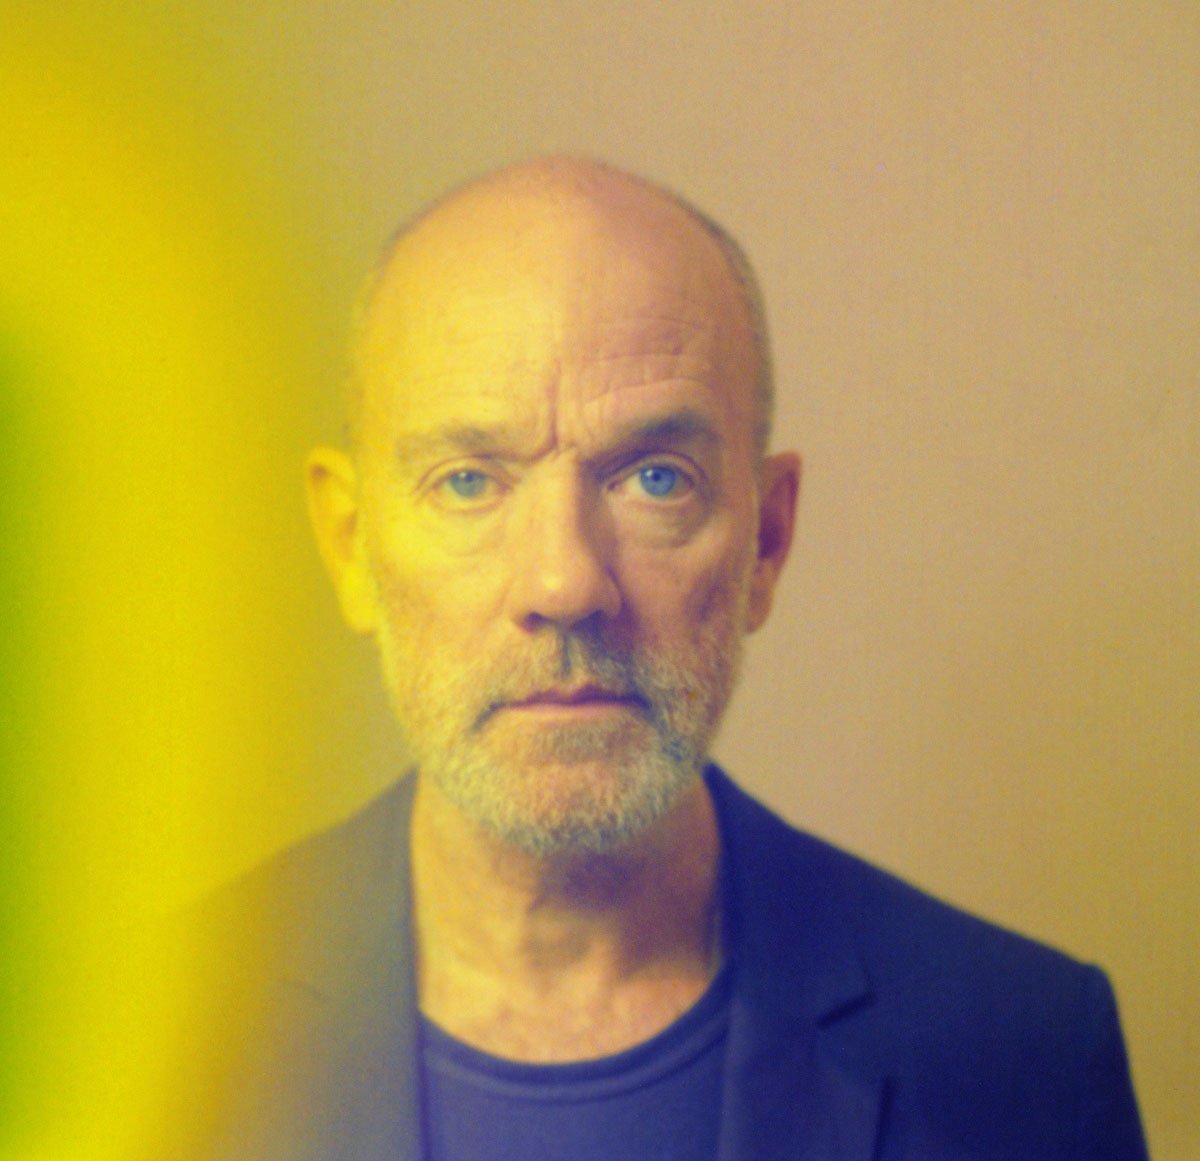 MICHAEL STIPE Releases Solo Debut “Your Capricious Soul” - Watch Video 